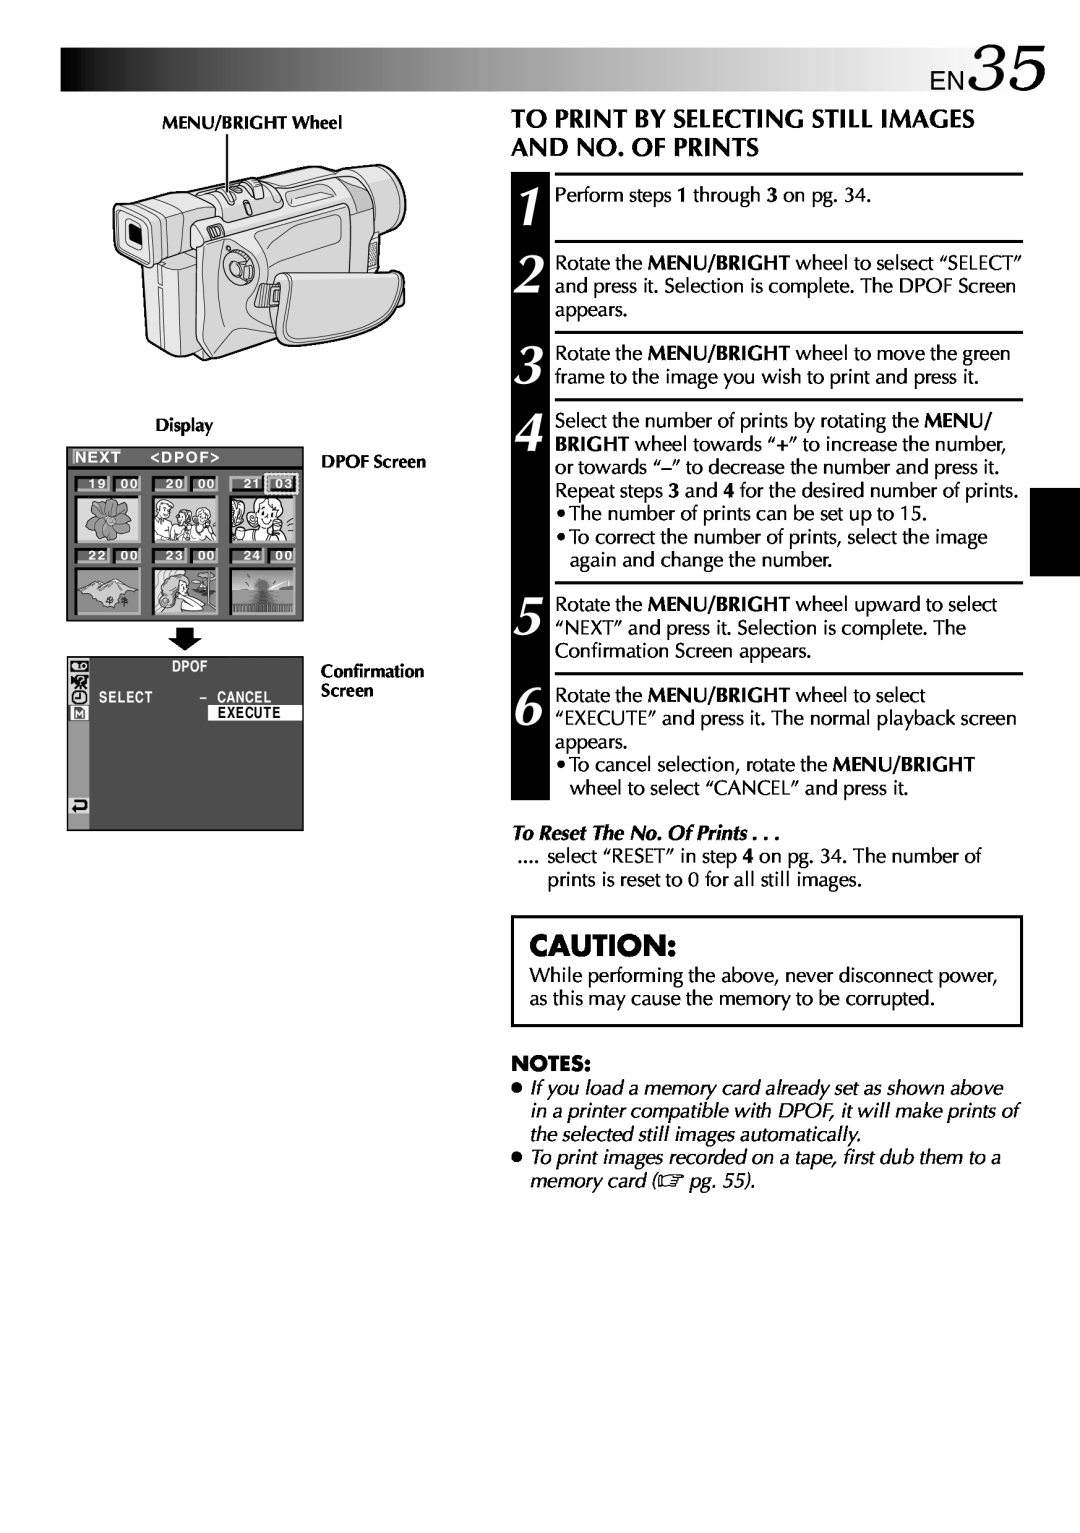 JVC GR-DVL512 specifications EN35, To Print By Selecting Still Images And No. Of Prints, To Reset The No. Of Prints 